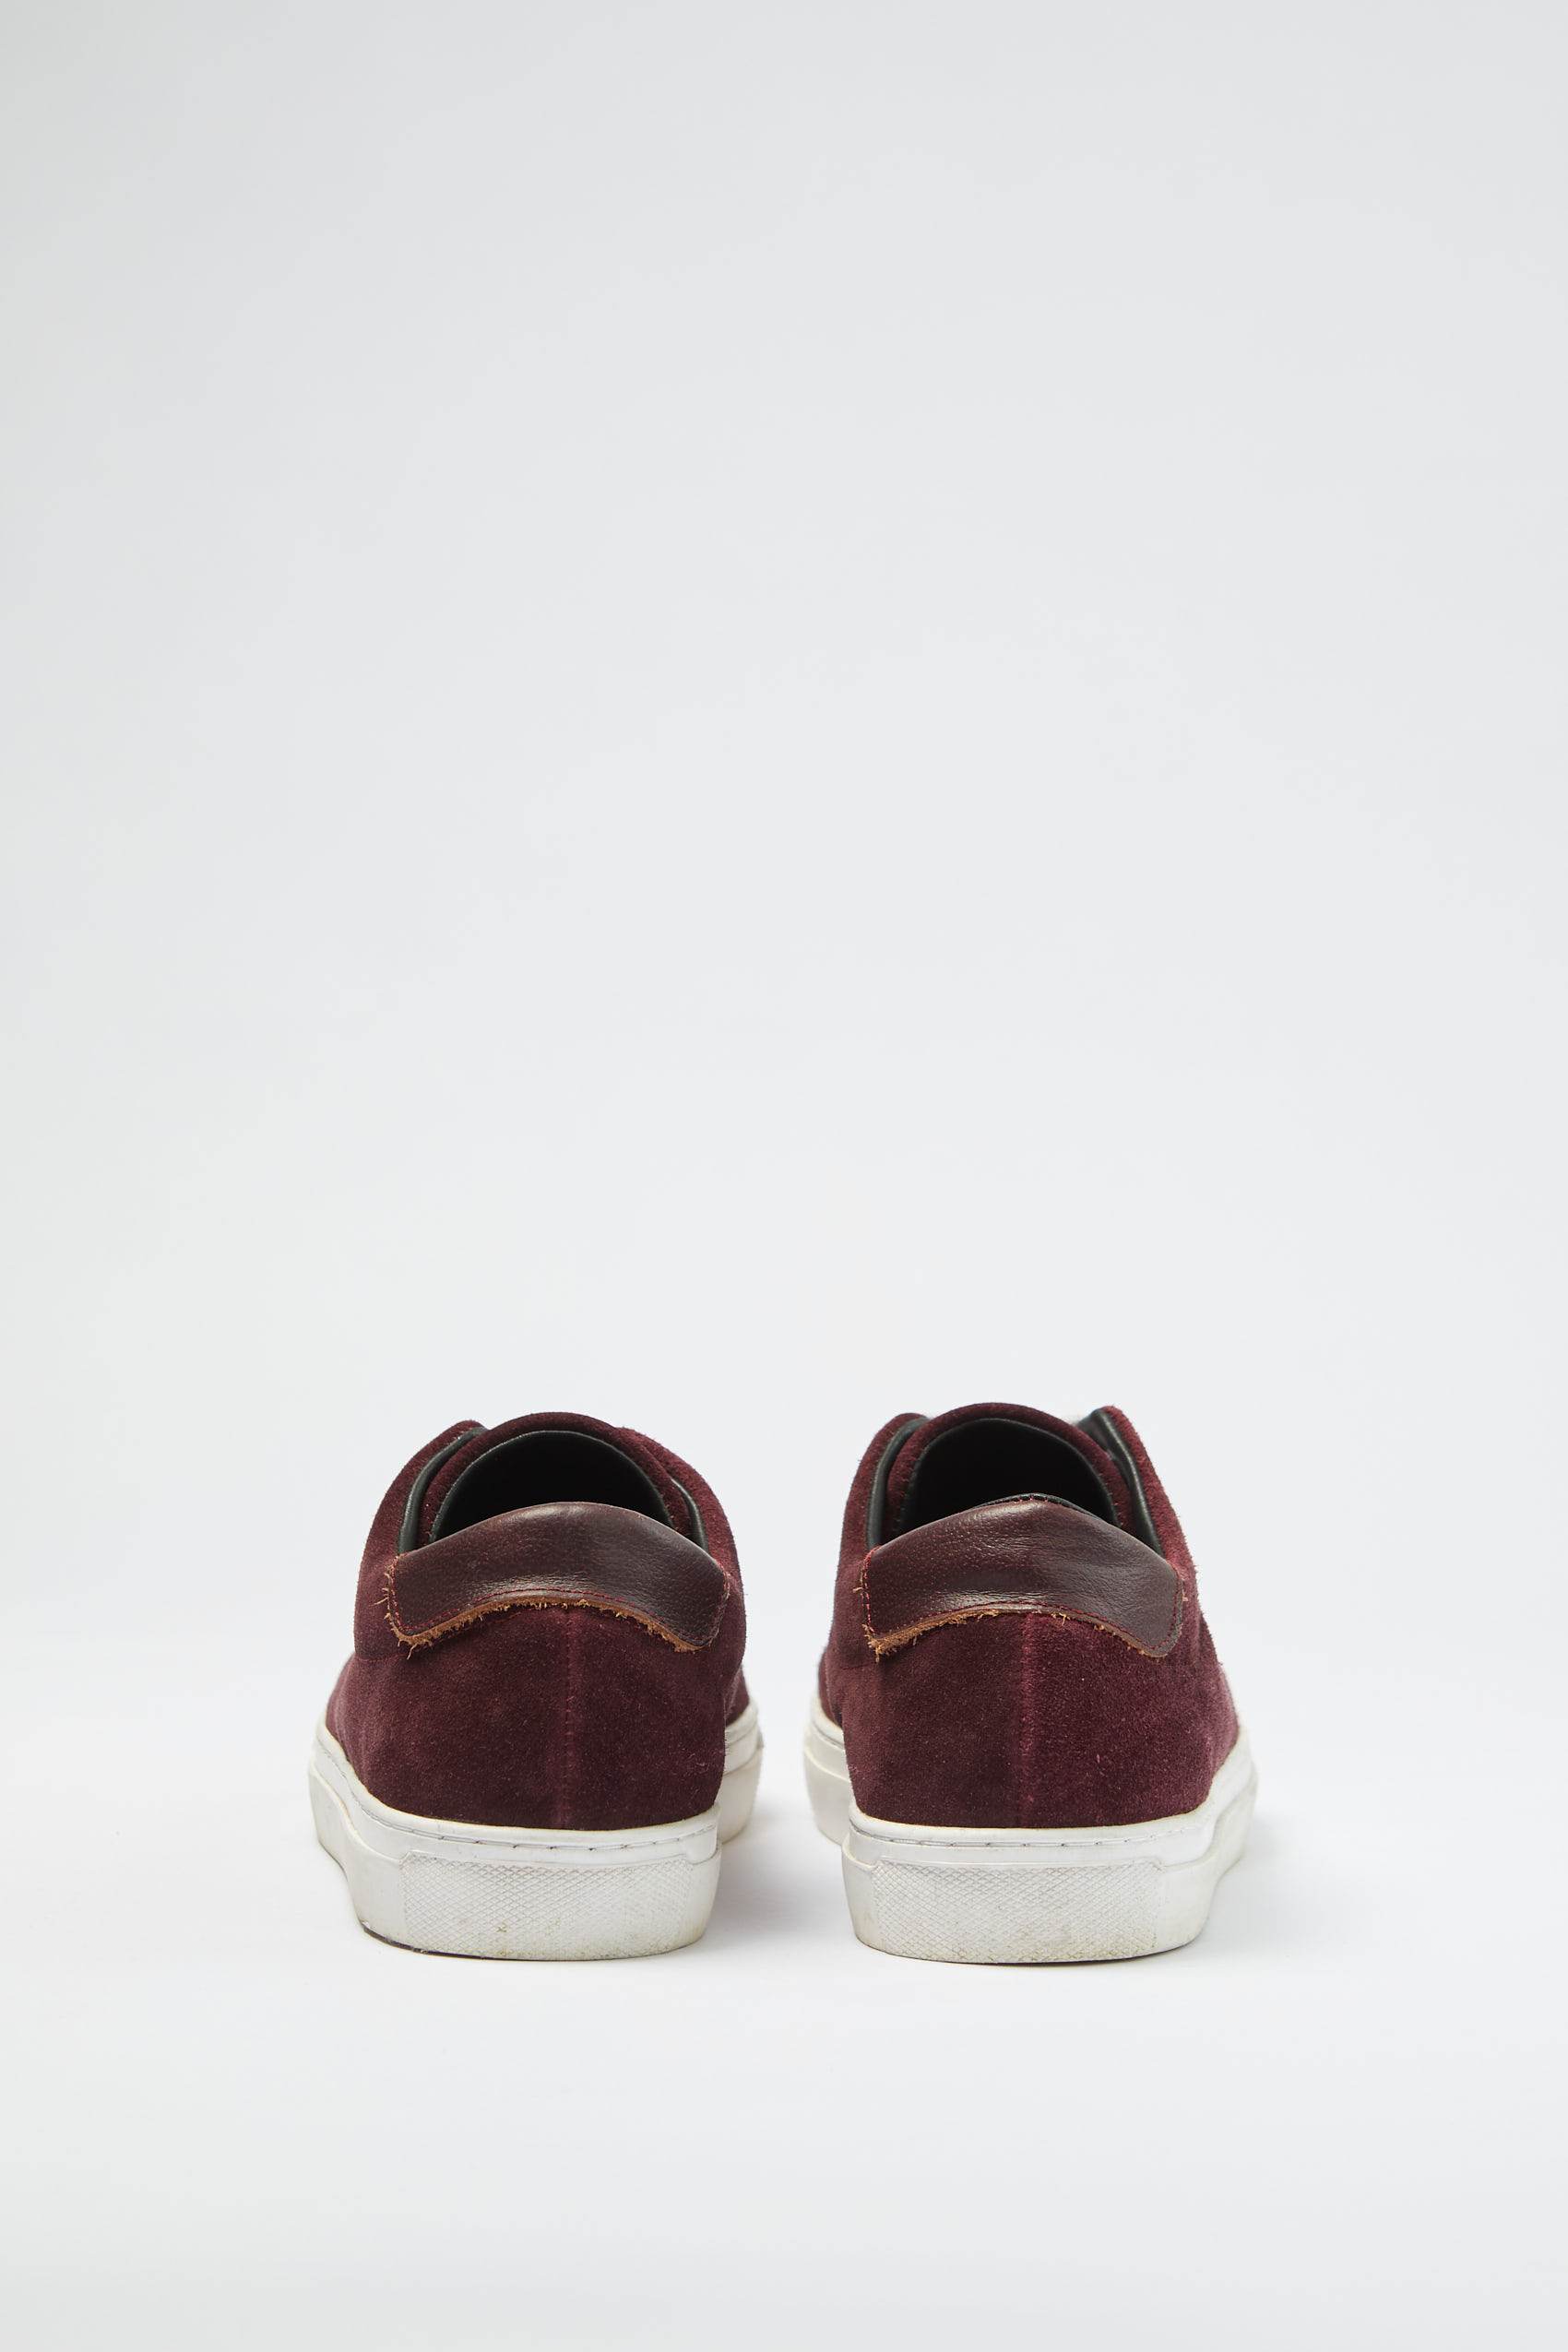 penguin_suede-sneakers_39-30-2022__picture-27085